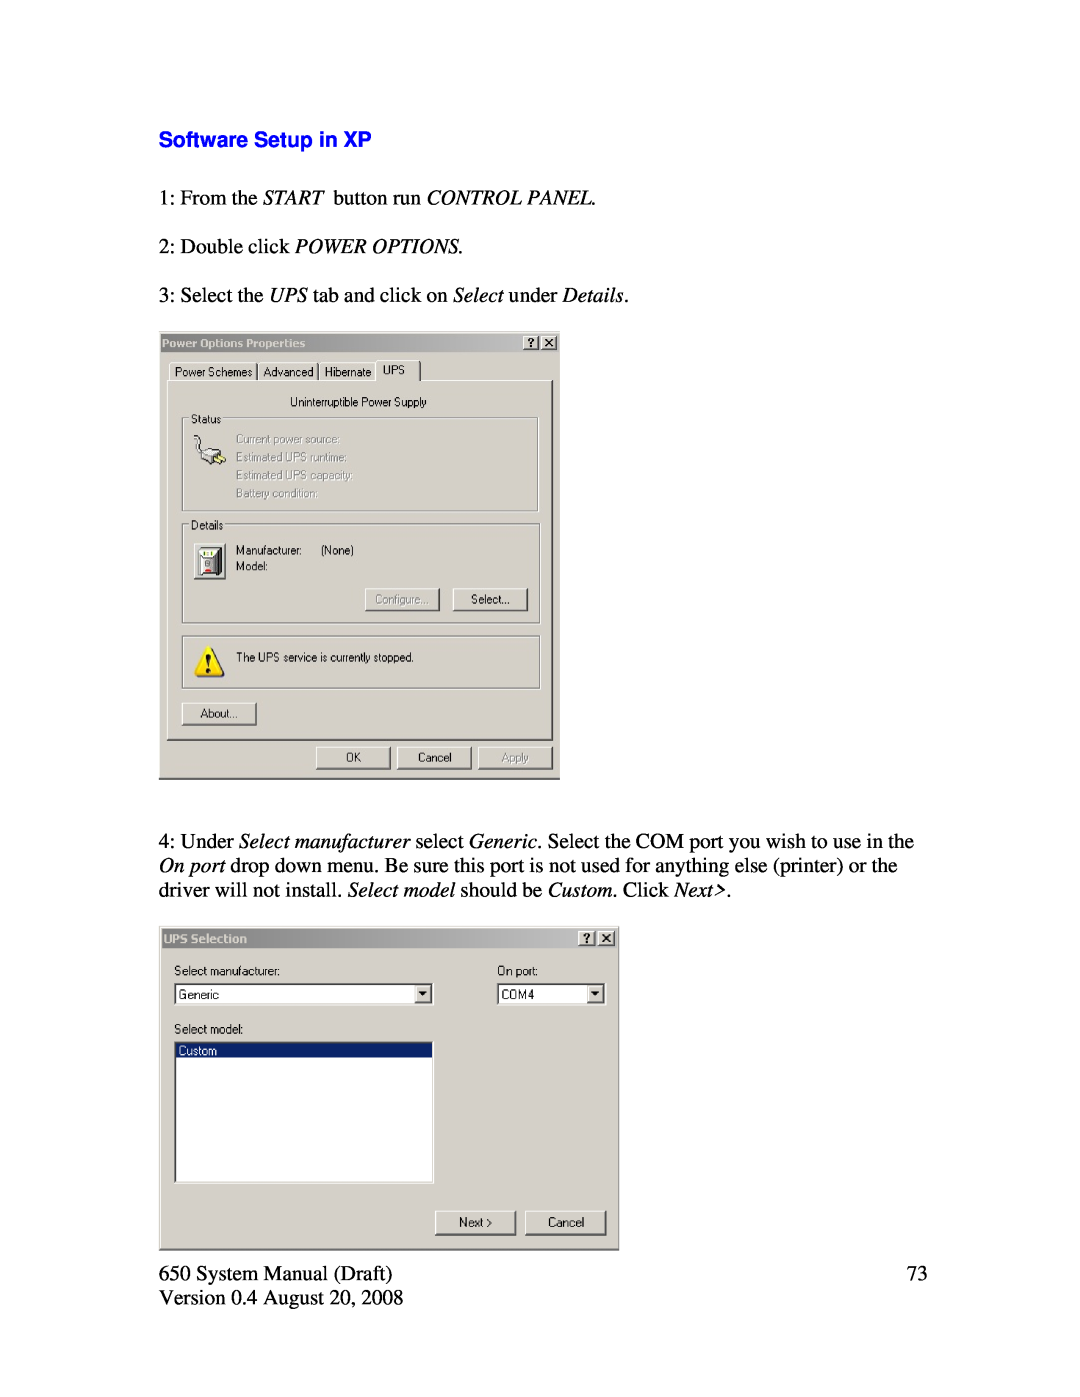 Intel J2 650 system manual Software Setup in XP, Double click POWER OPTIONS 